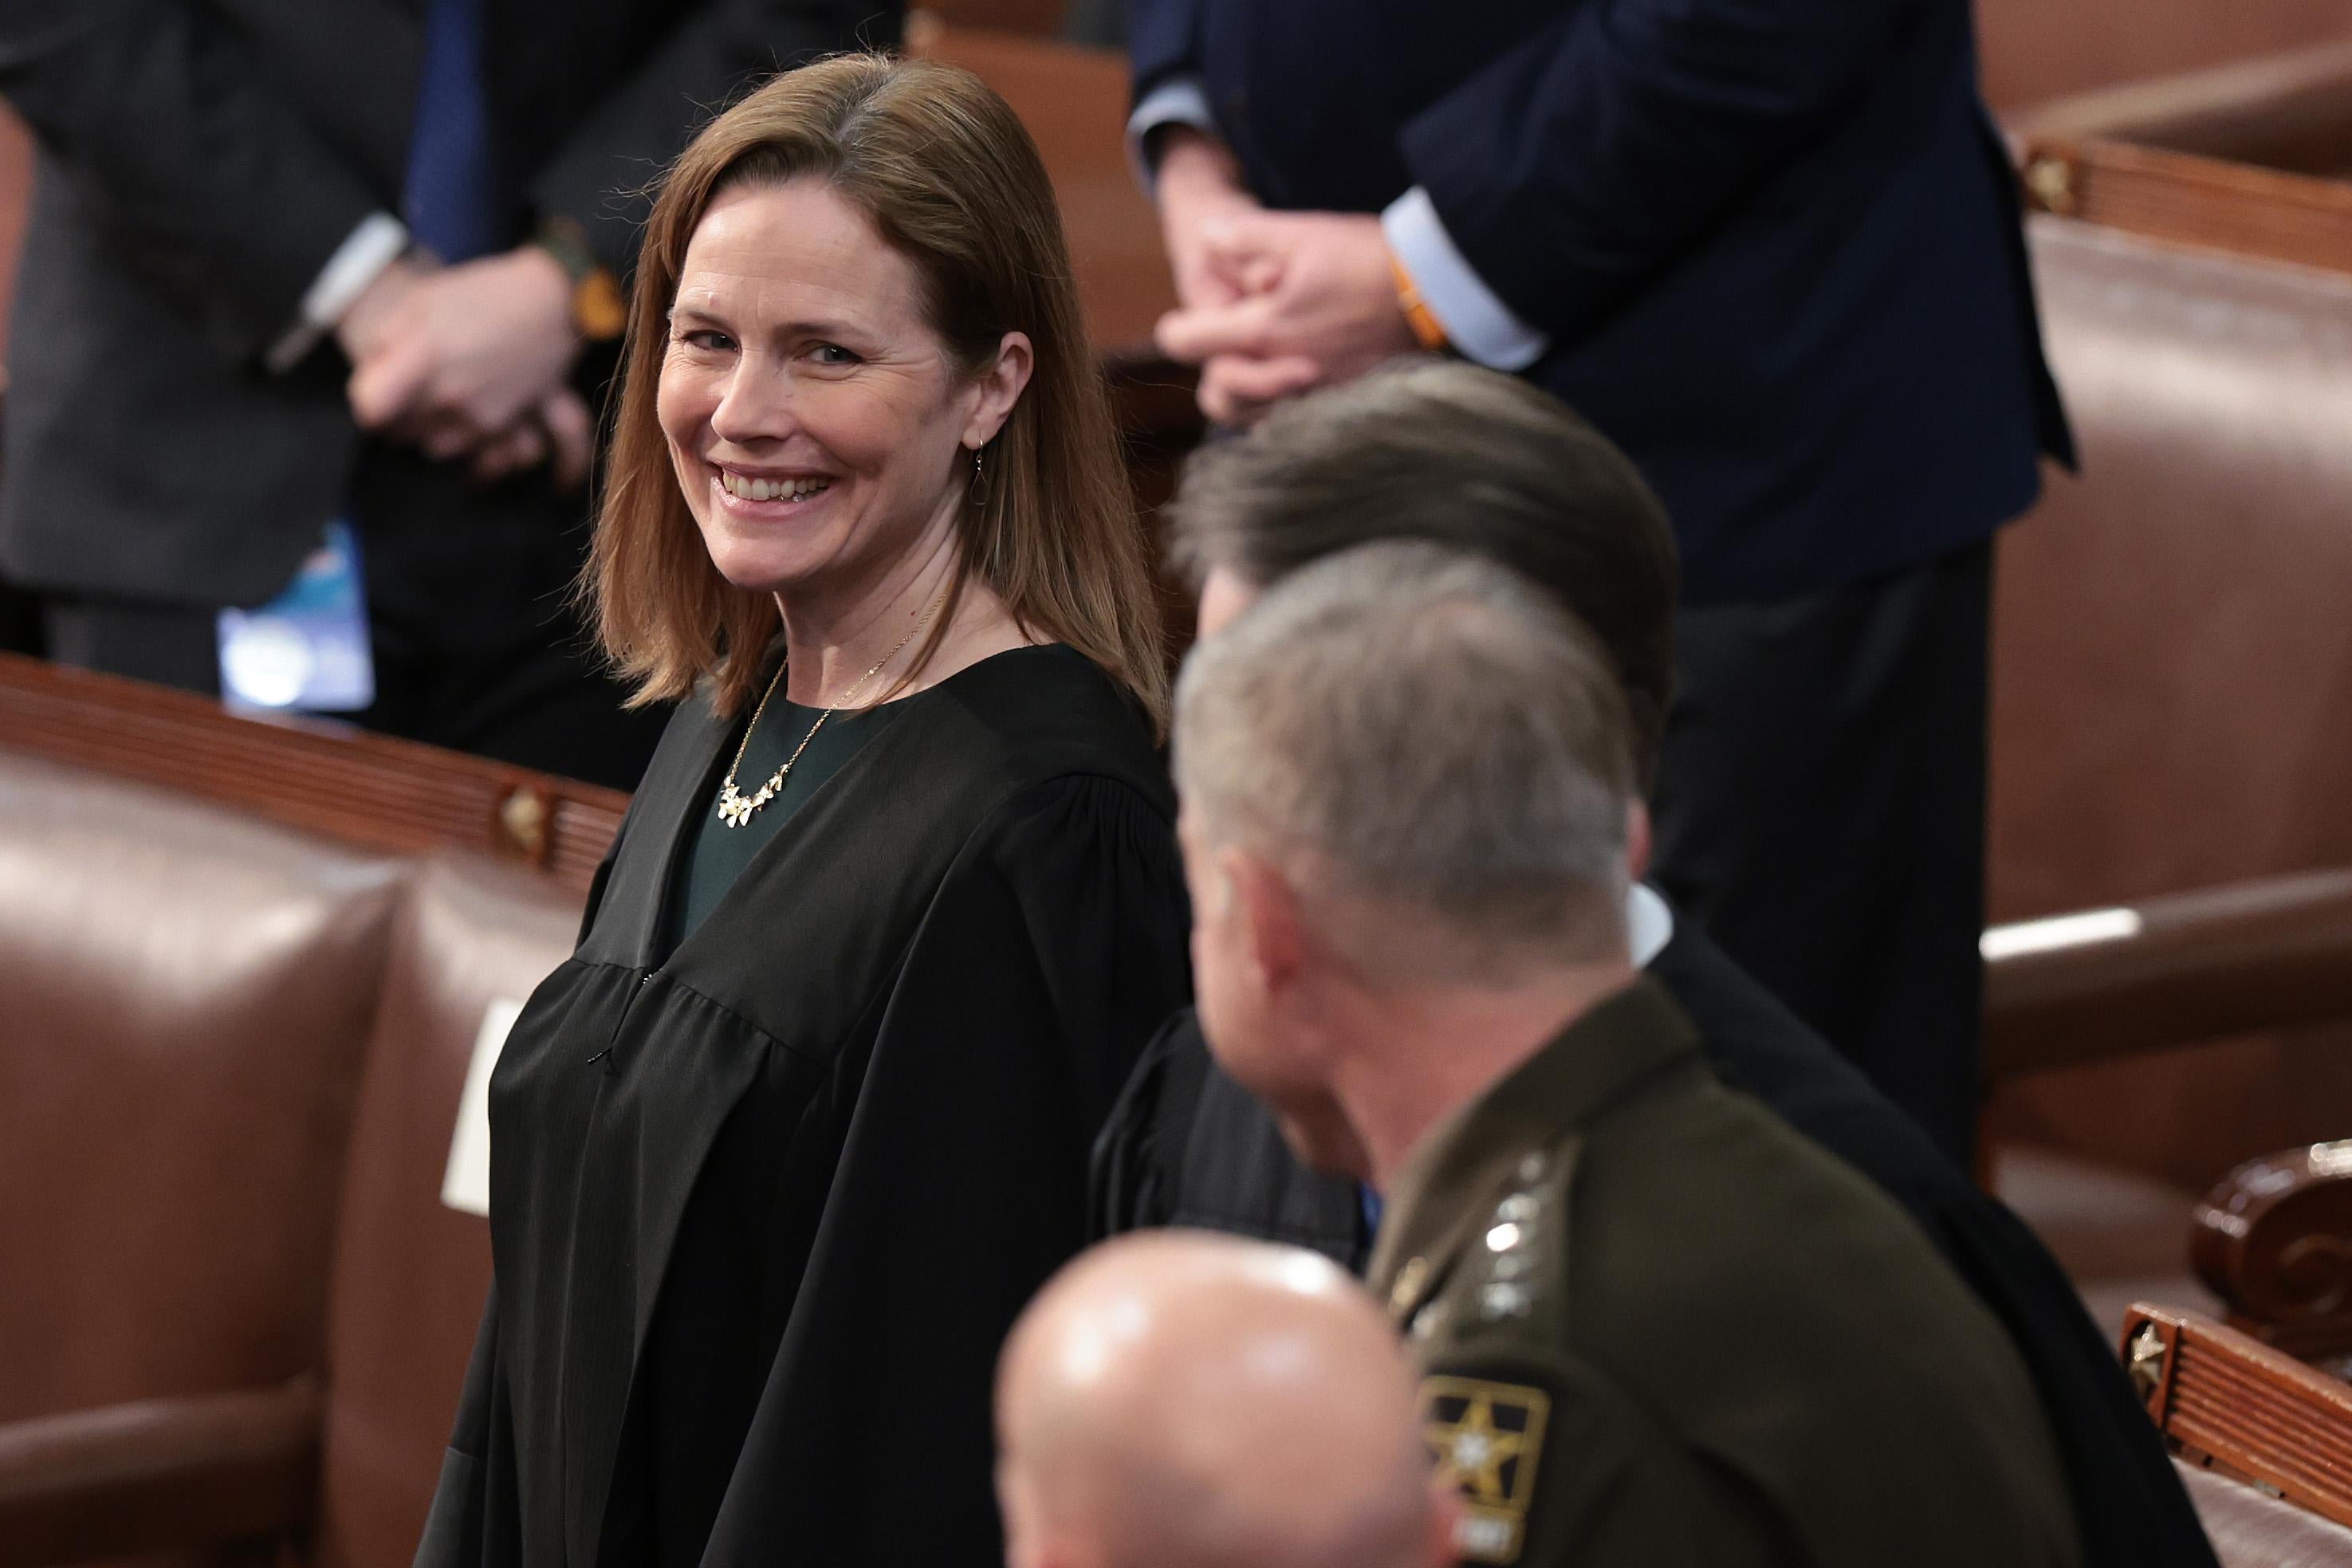 Barrett in her robes grinning as she stands in the House chamber